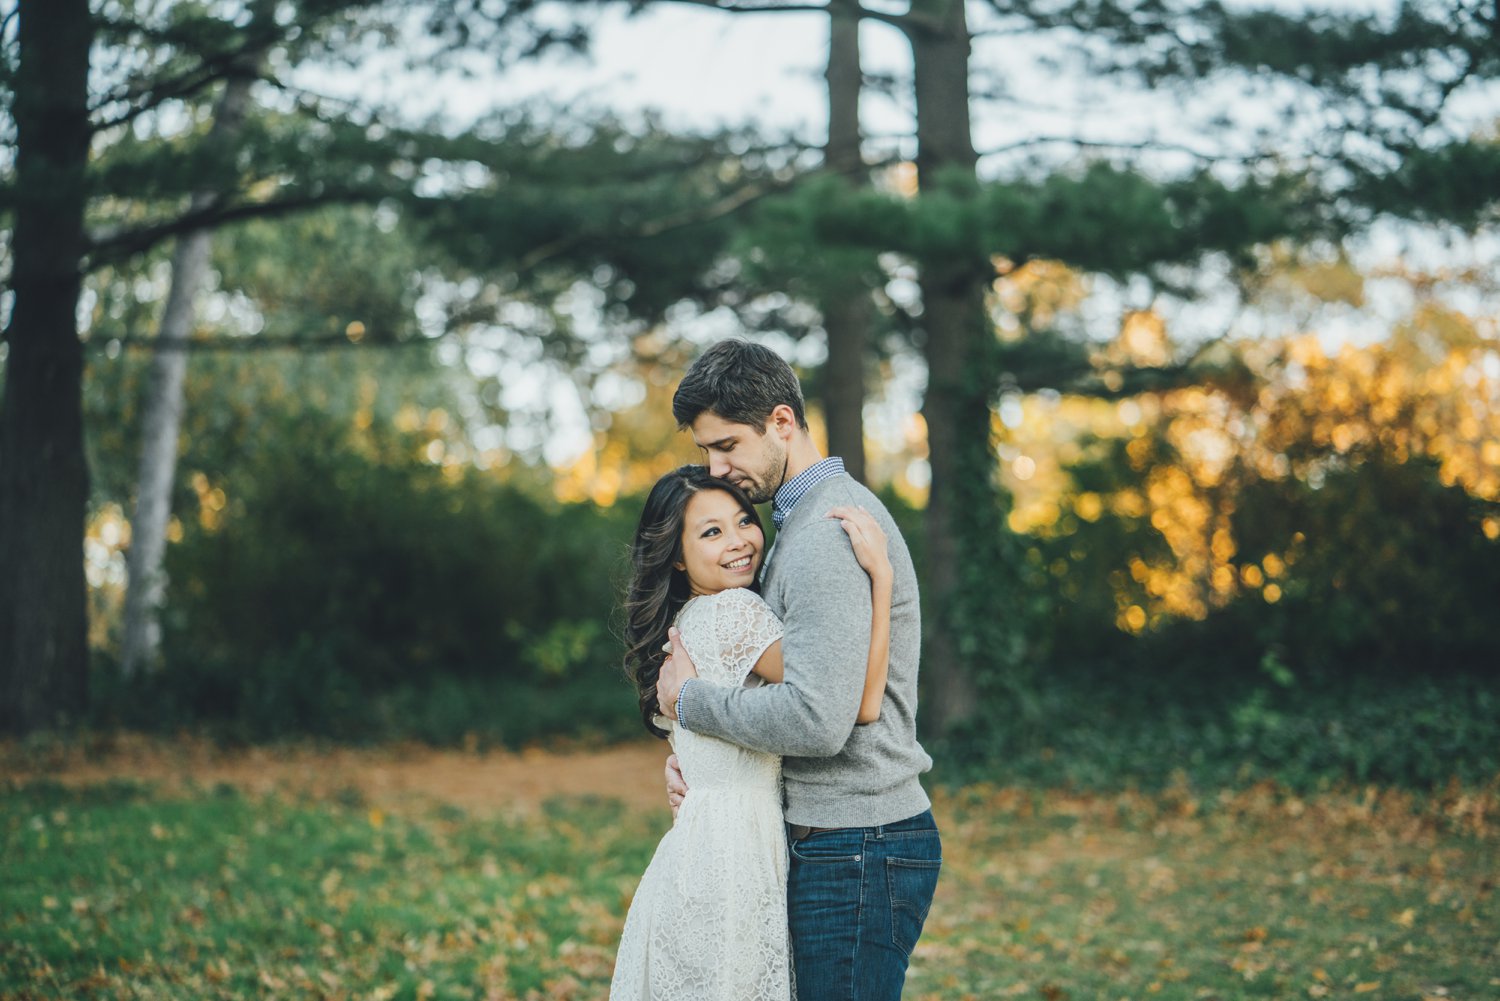 77NYC-NJ-ENGAGEMENT-PHOTOGRAPHY-BY-INTOTHESTORY-MOO-JAE.JPG